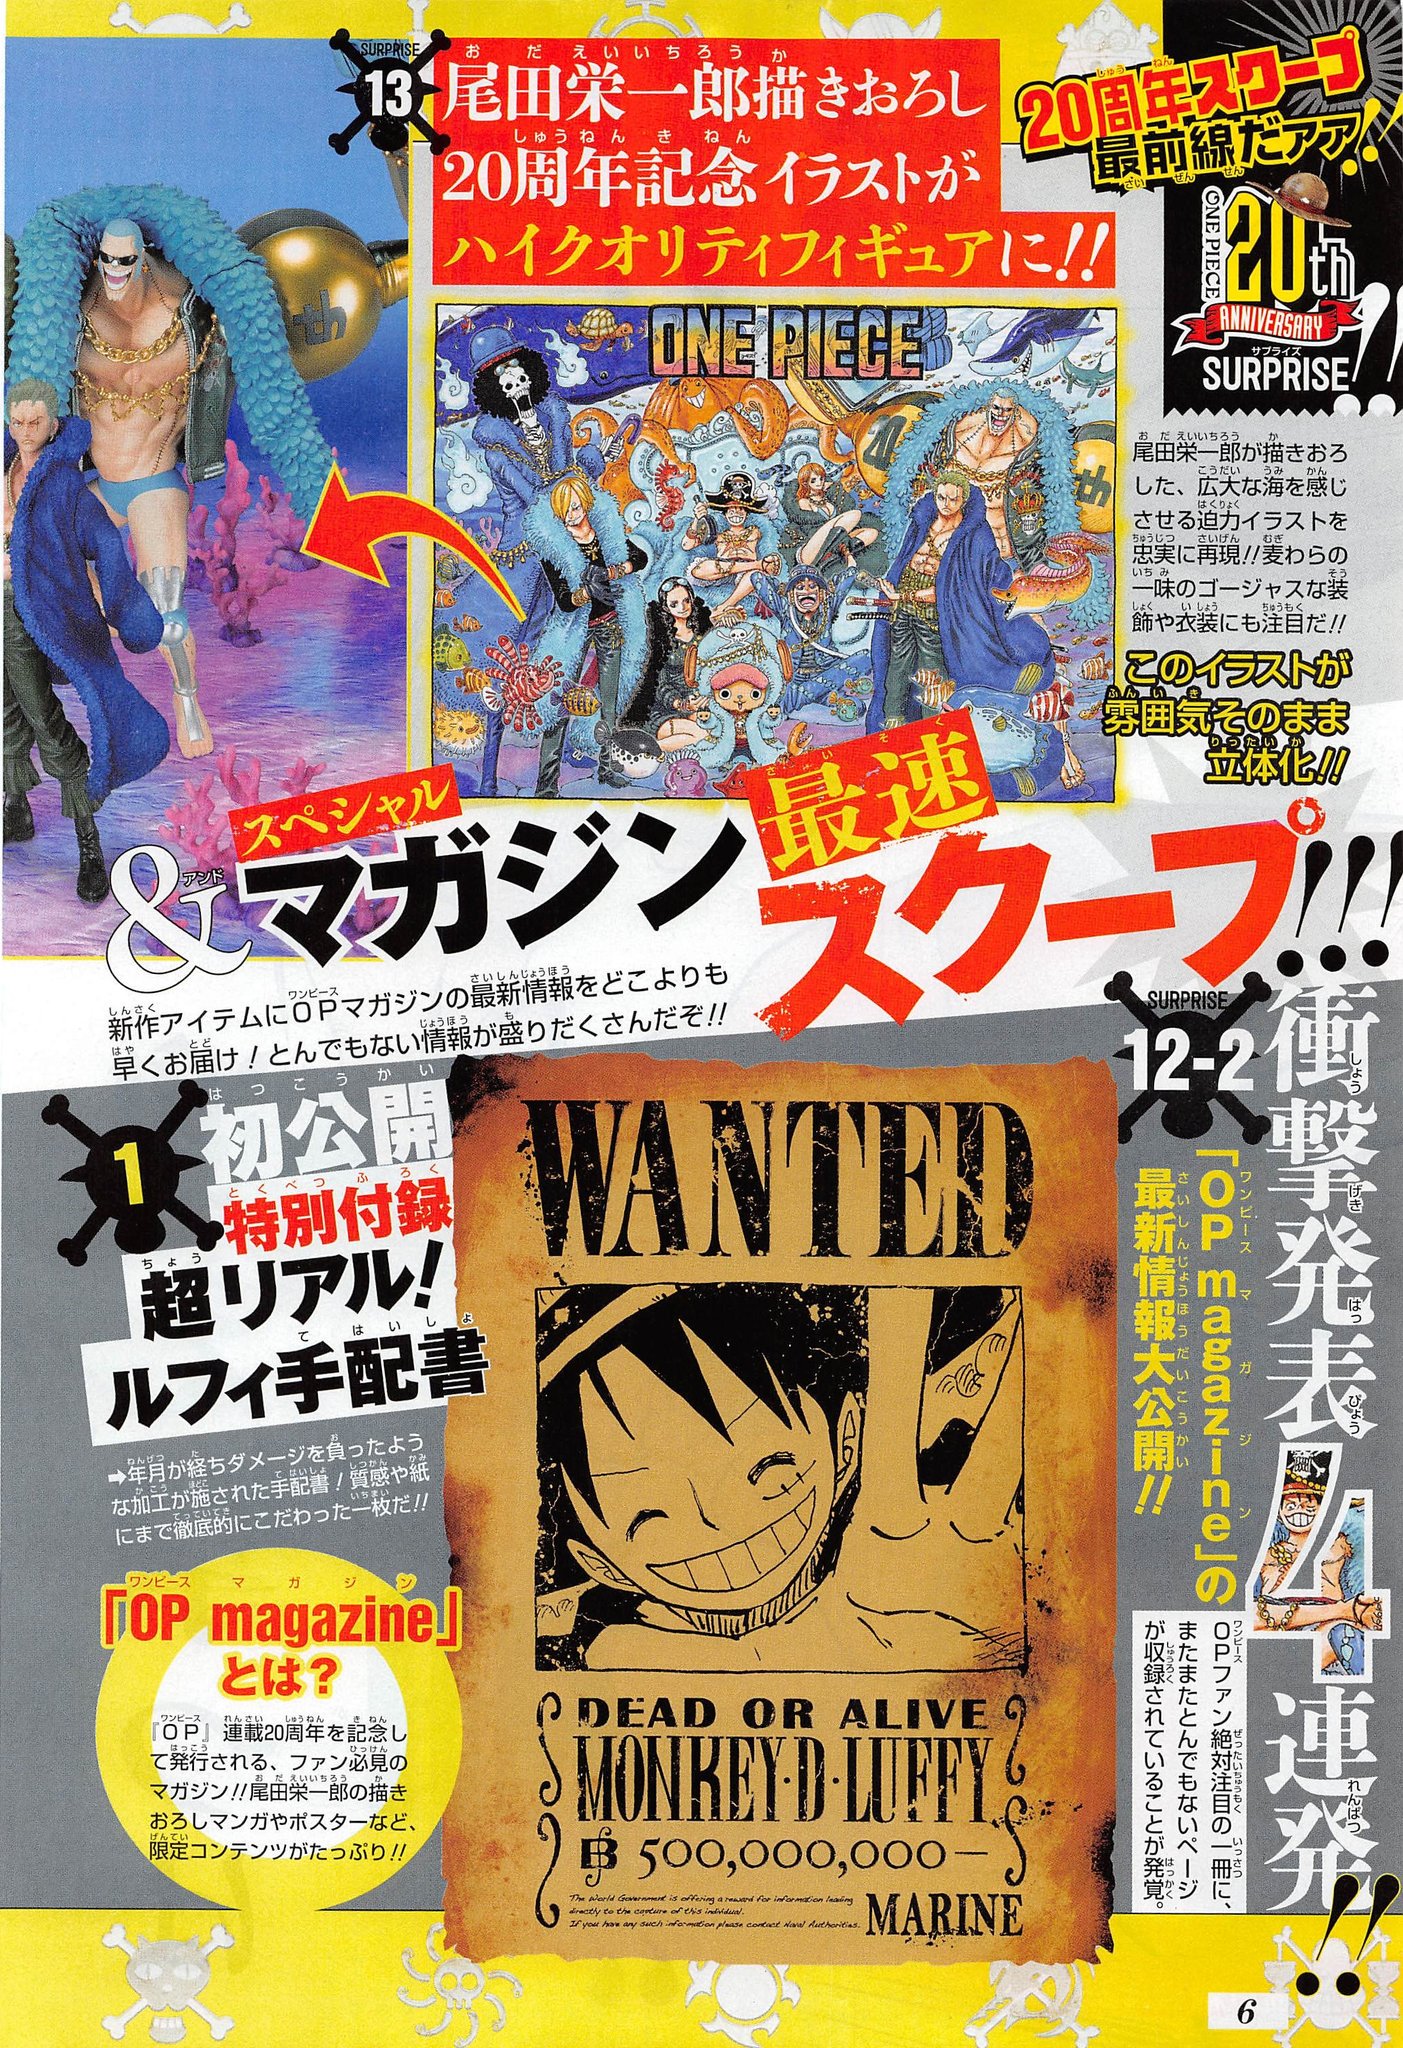 Yonkouproductions One Piece th Anniversary Figurines And Picture Book Announced T Co Rfgw0abapj Twitter